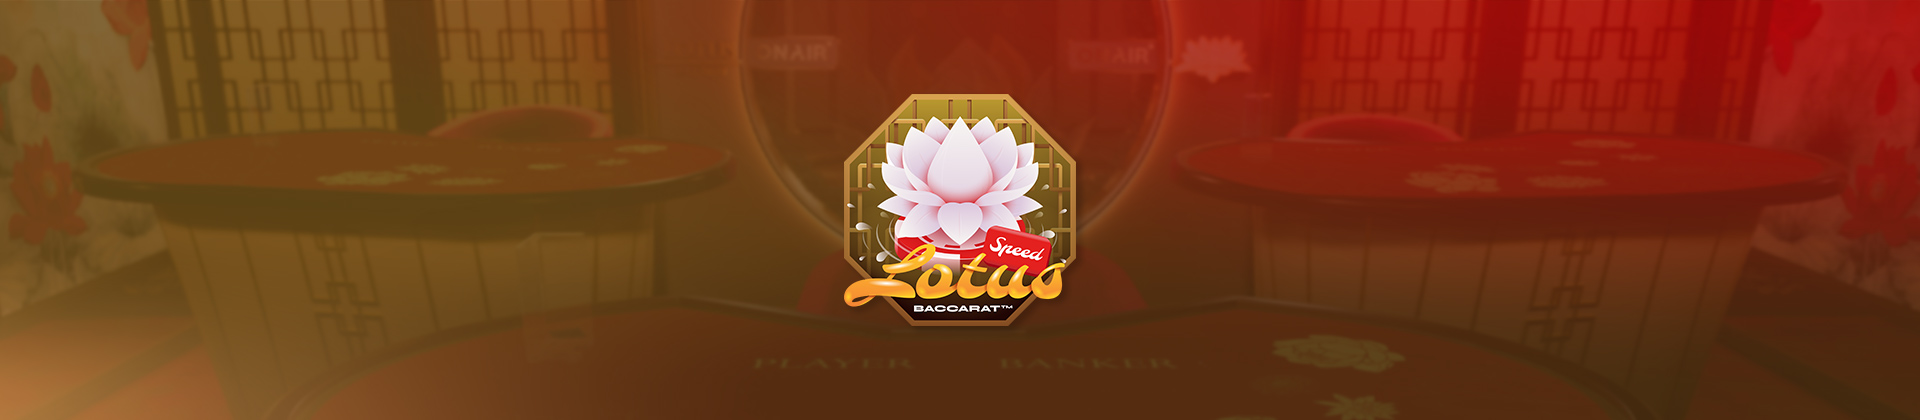 Speed Lotus Baccarat game banner with the logo in the middle, and 3 game tables blurred out in the background.